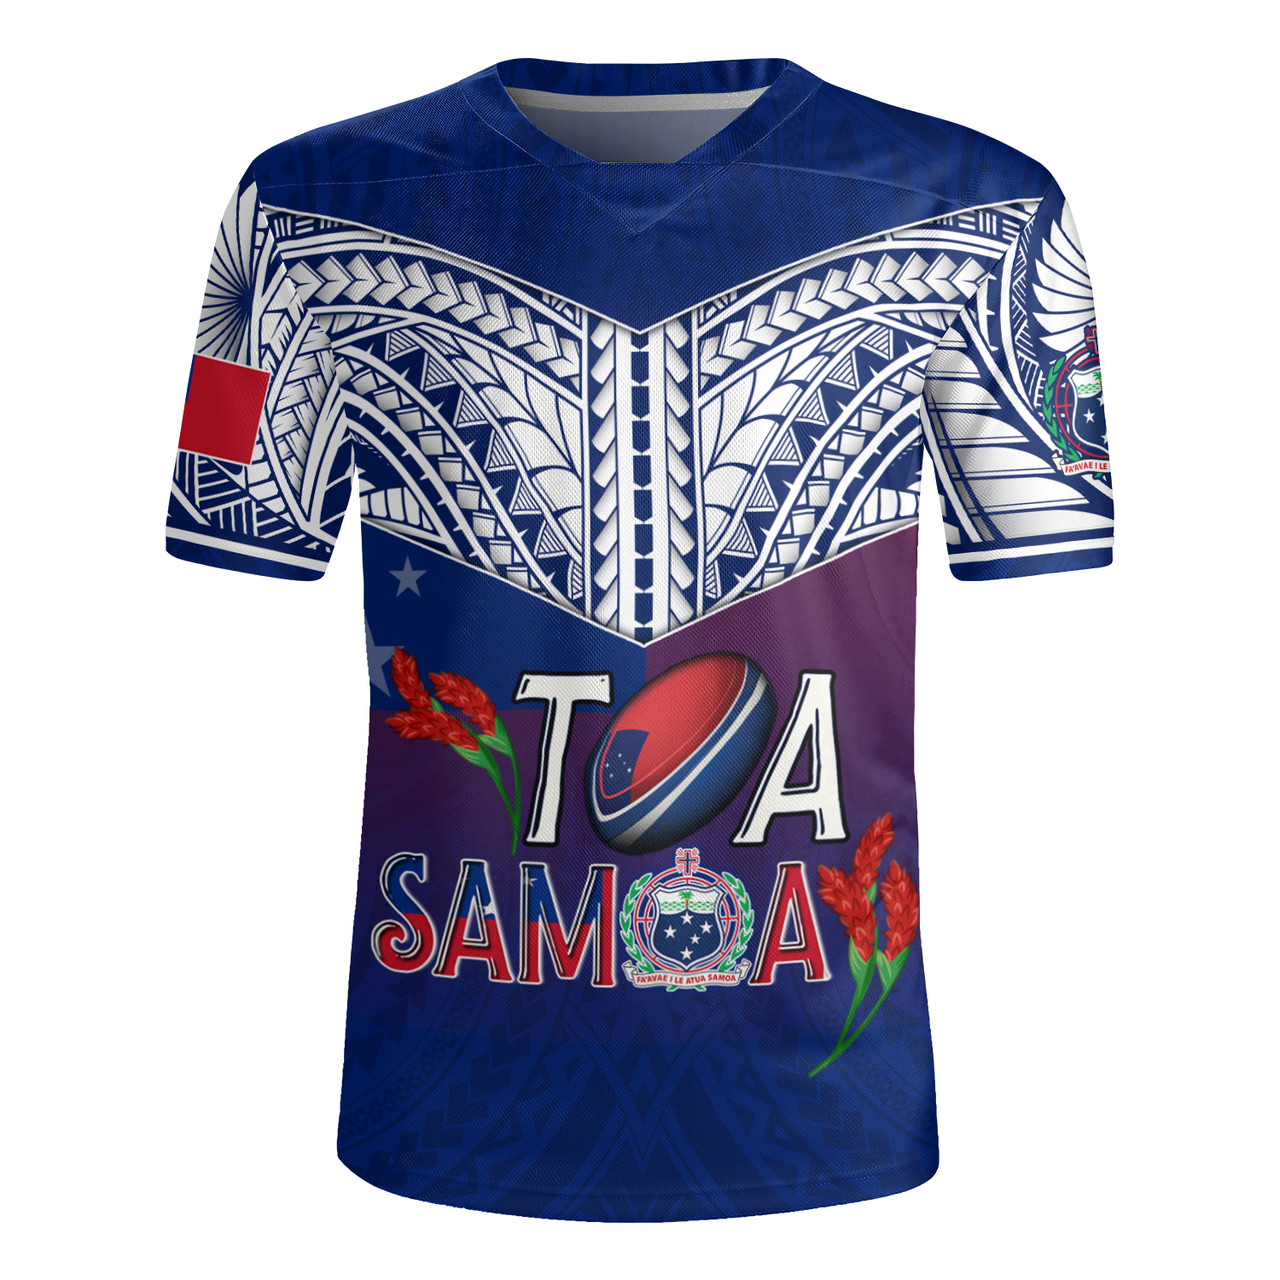 Samoa Toa Samoa Teuilia Flowers Style Men's All Over Printing Rugby Jersey